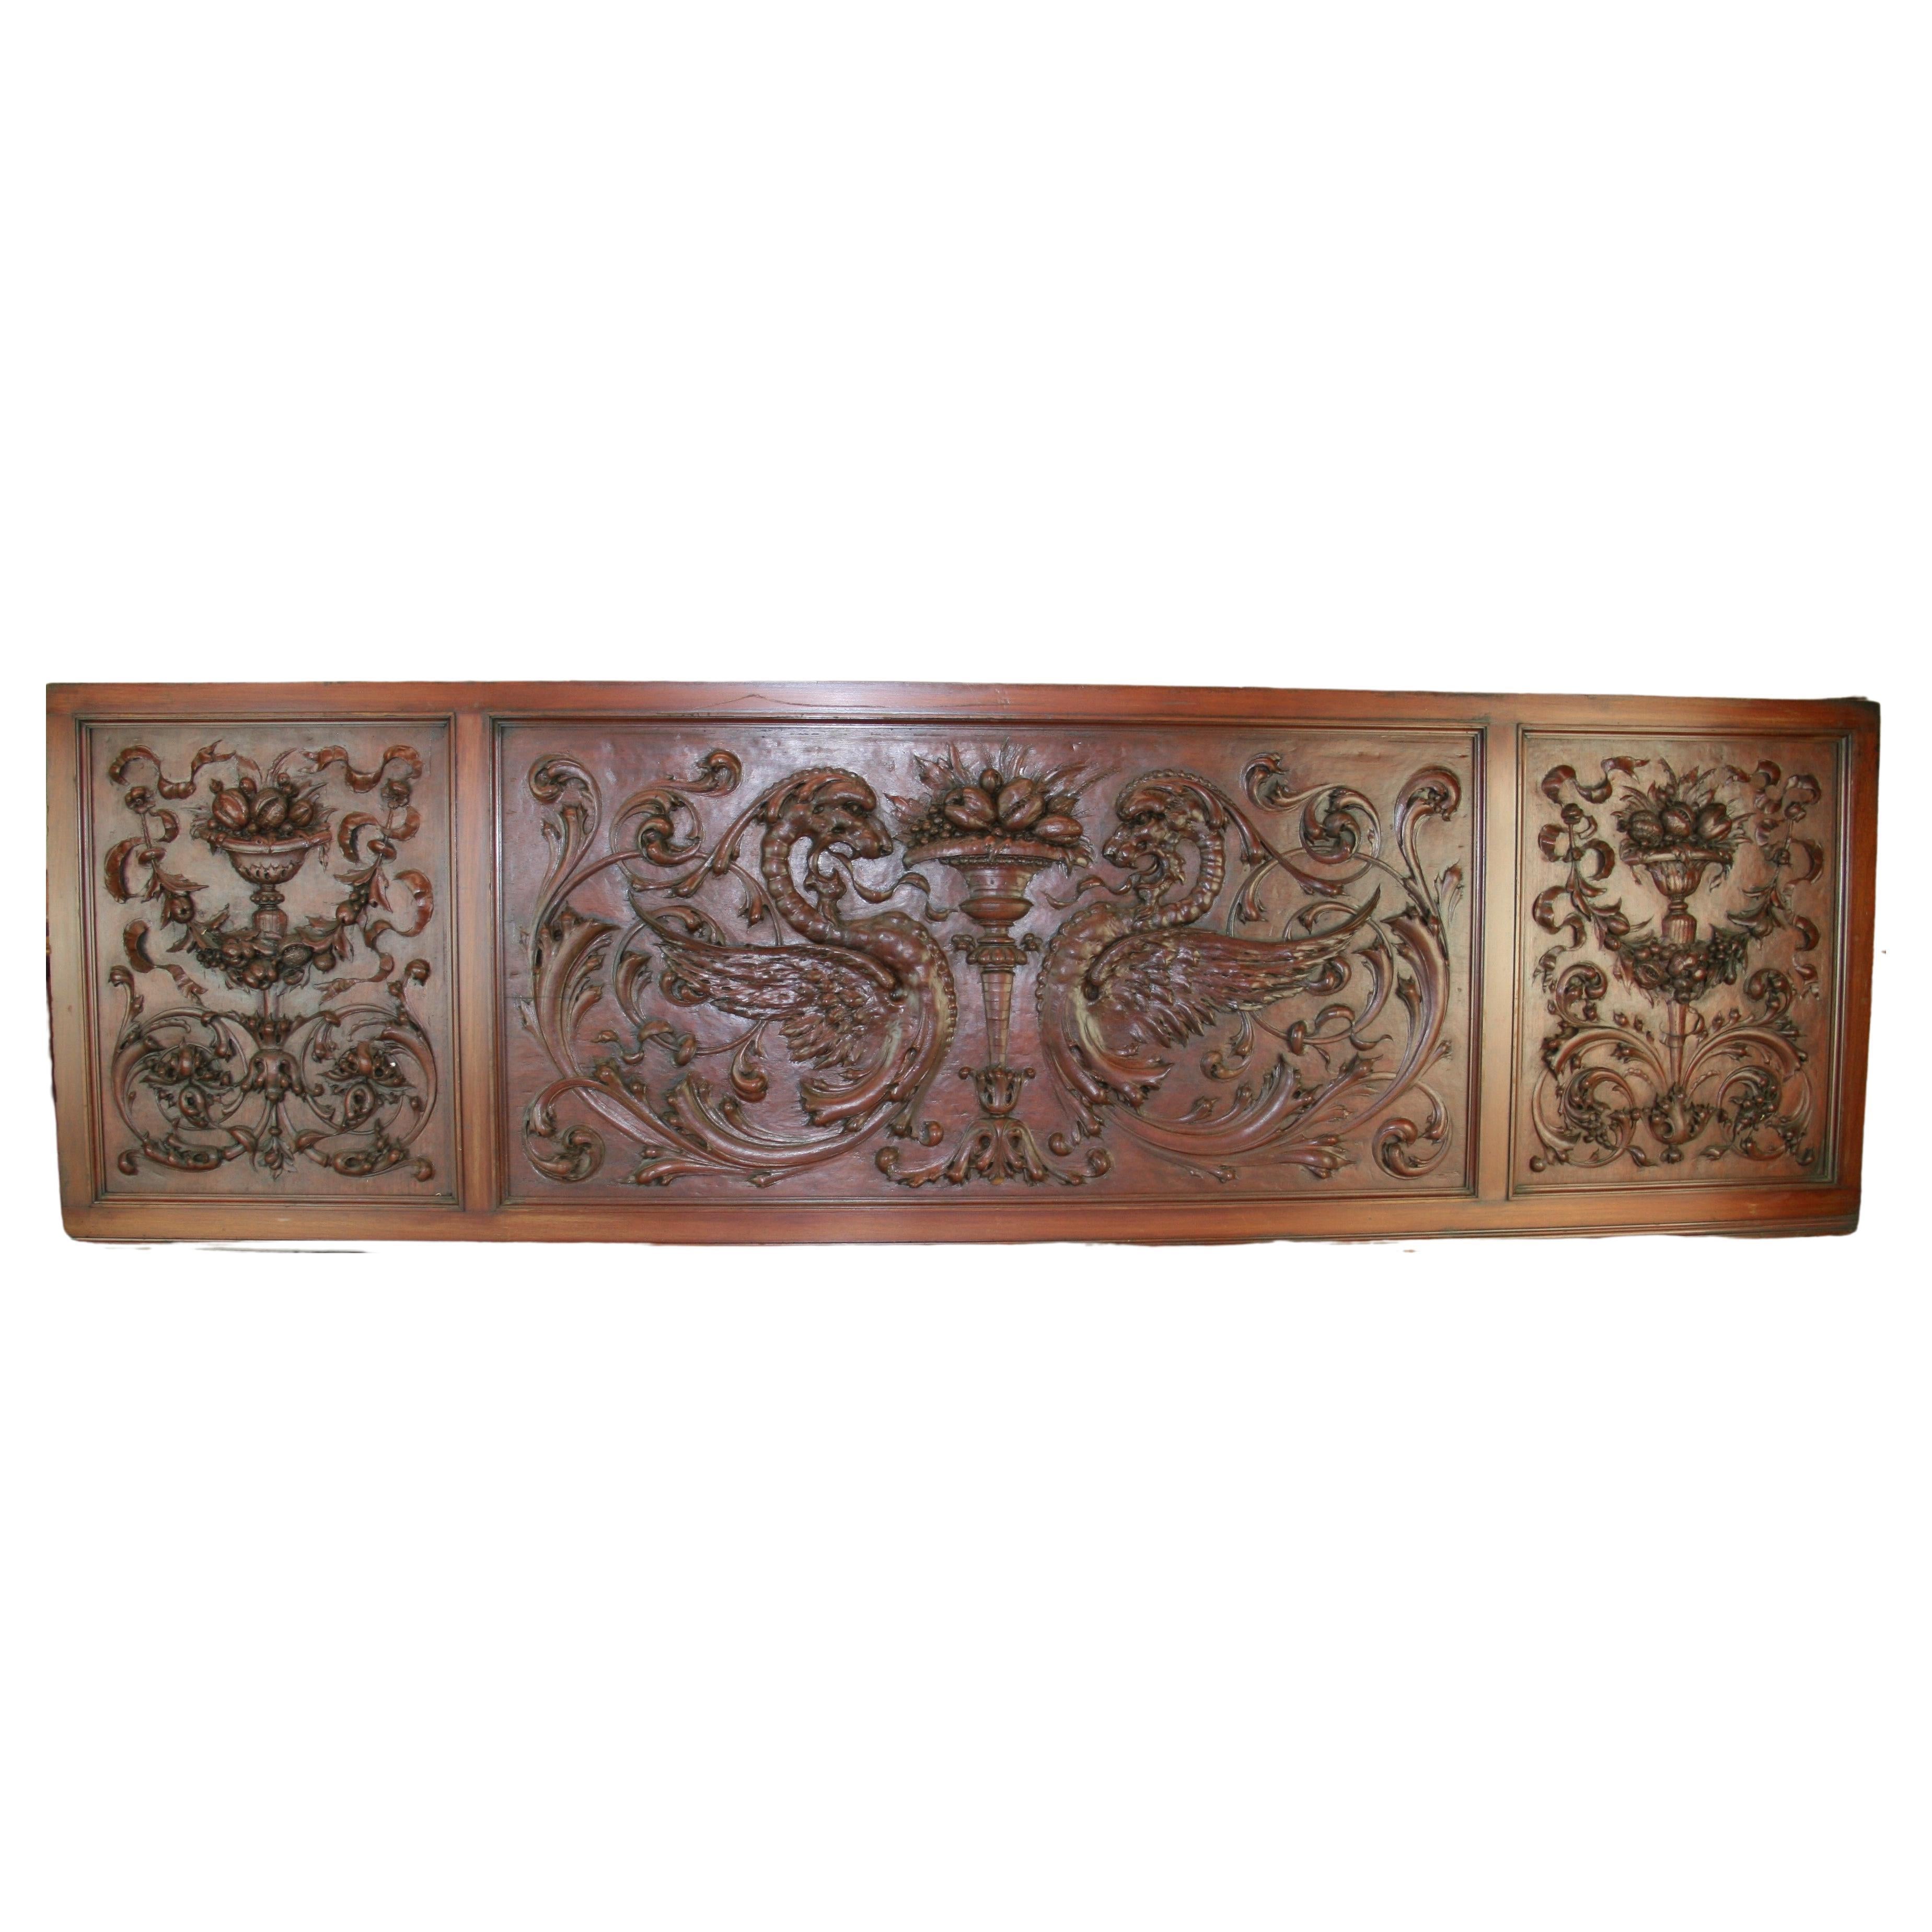  HandCarved Walnut Three Panel Oversized Architectural Element /Headboard 19th C For Sale